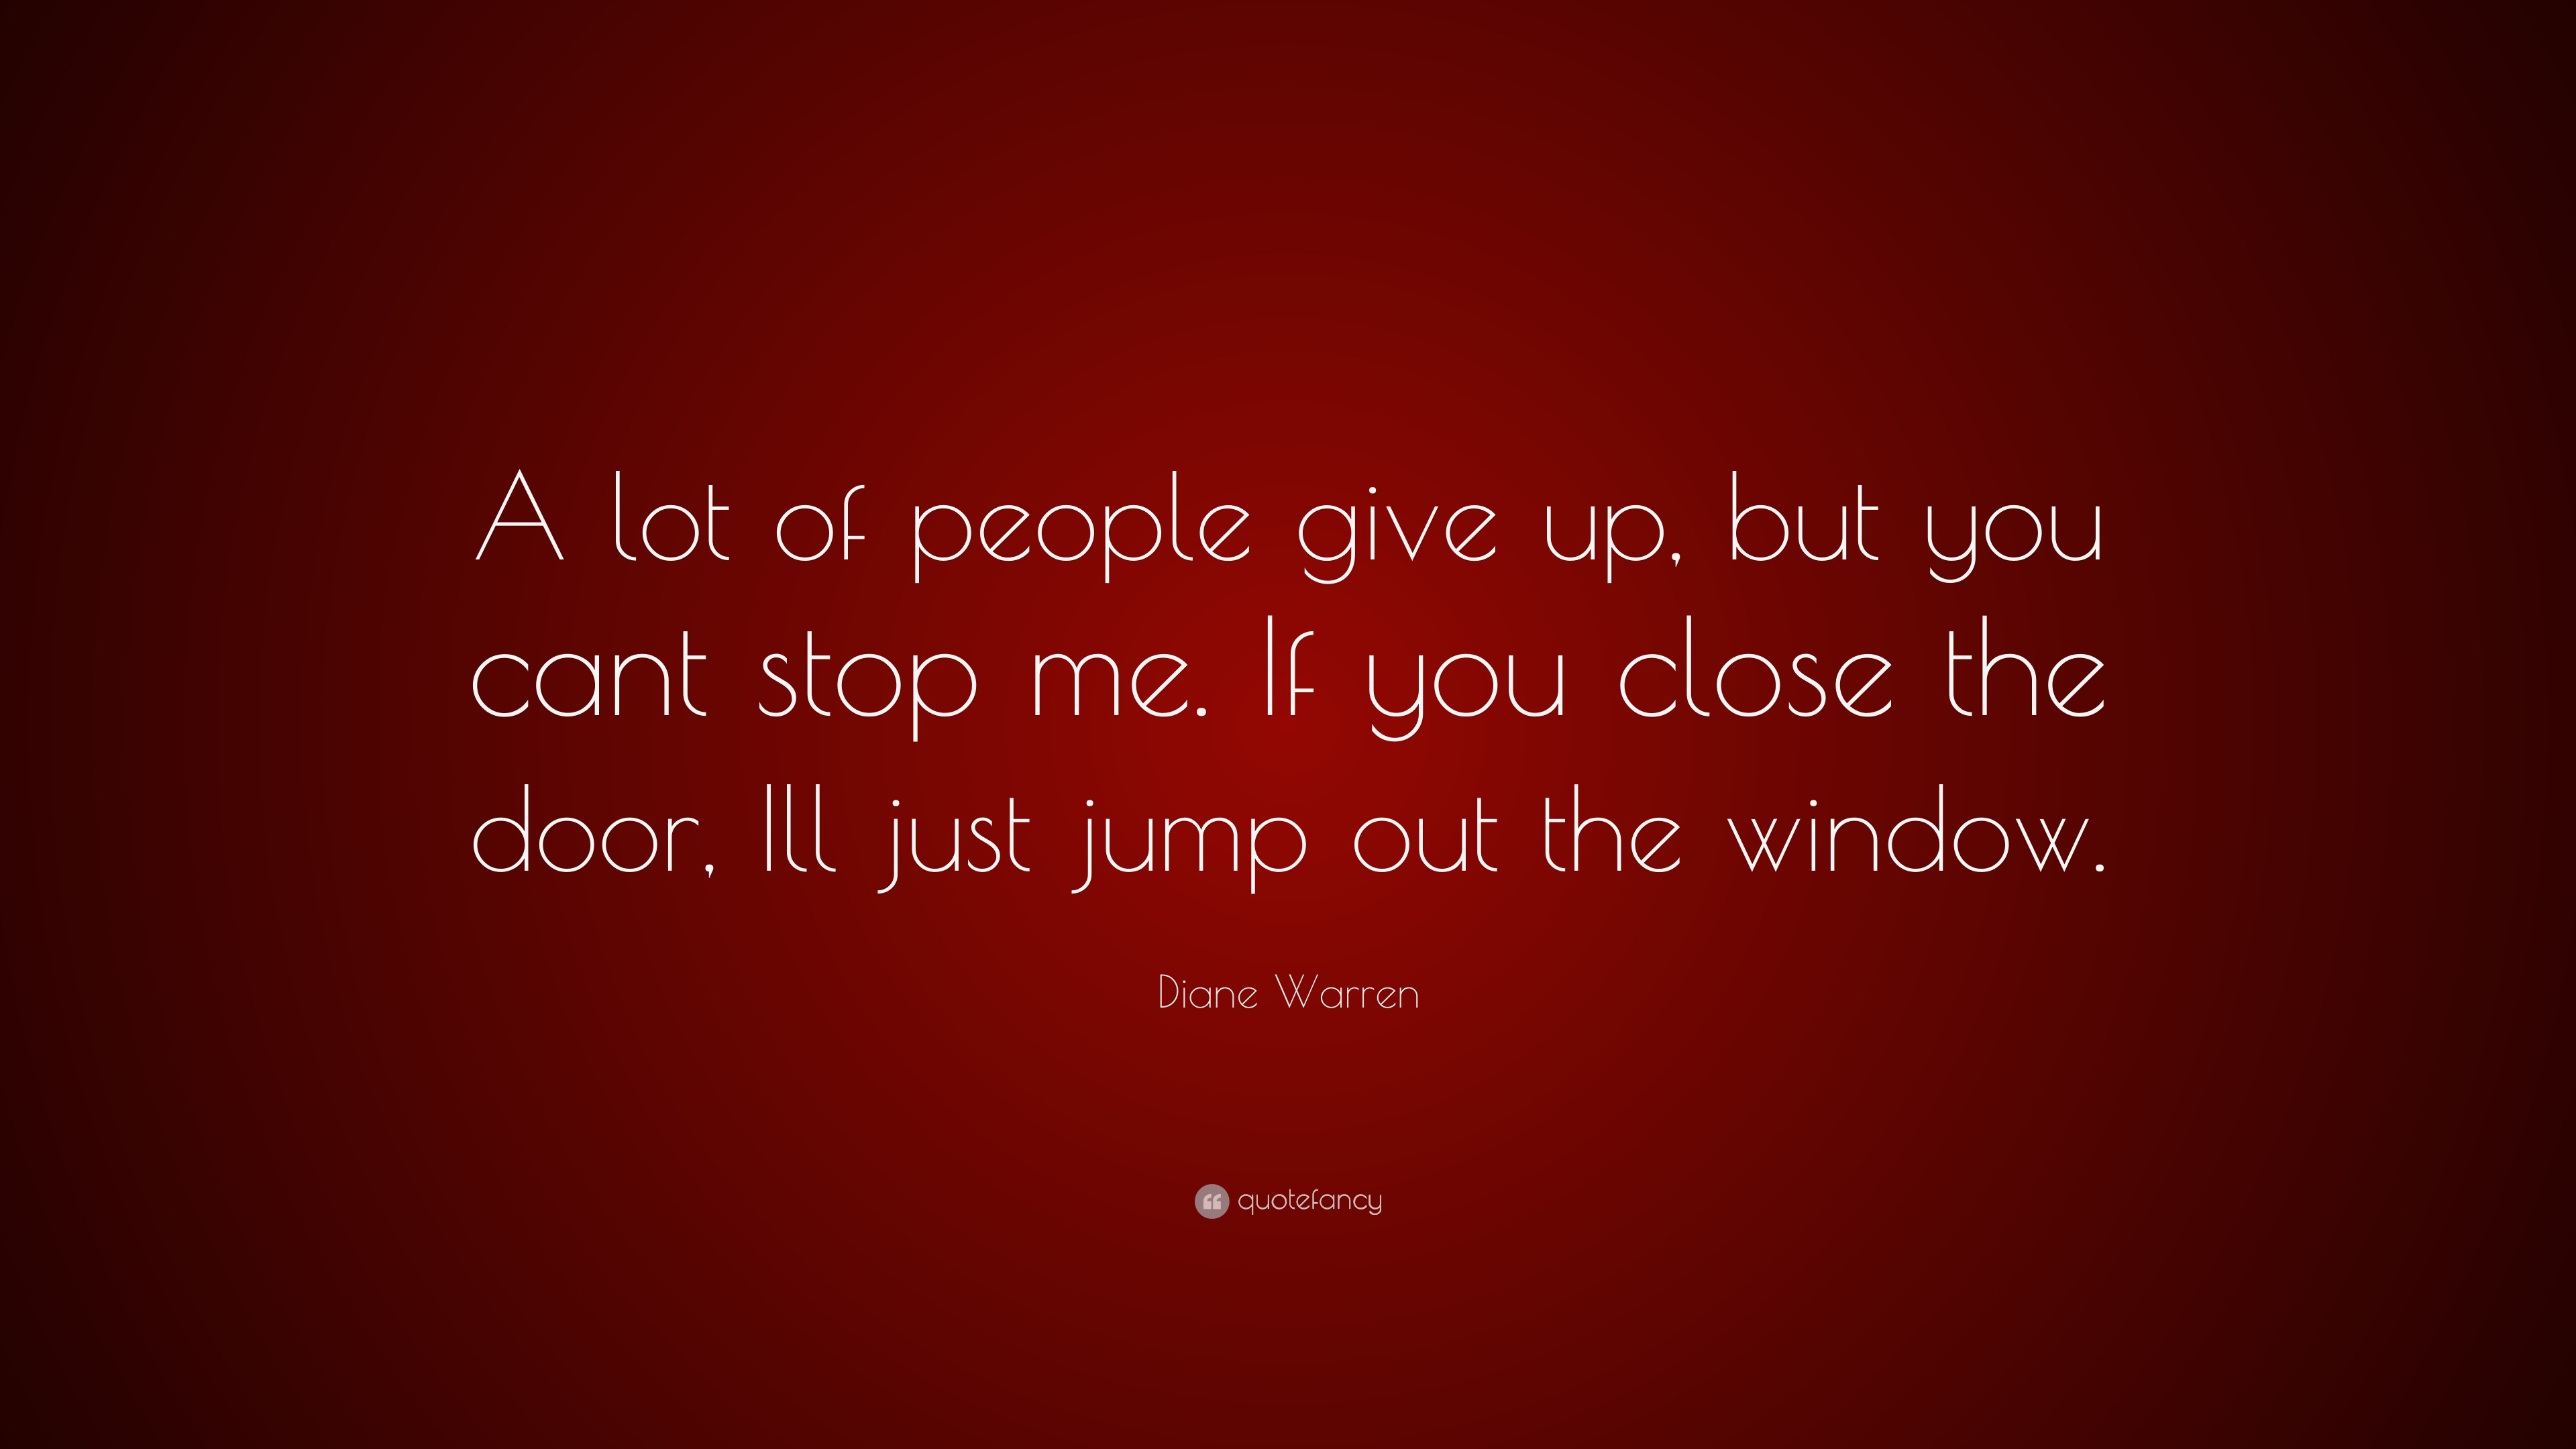 Diane Warren Quote A Lot Of People Give Up But You Cant Stop Me If You